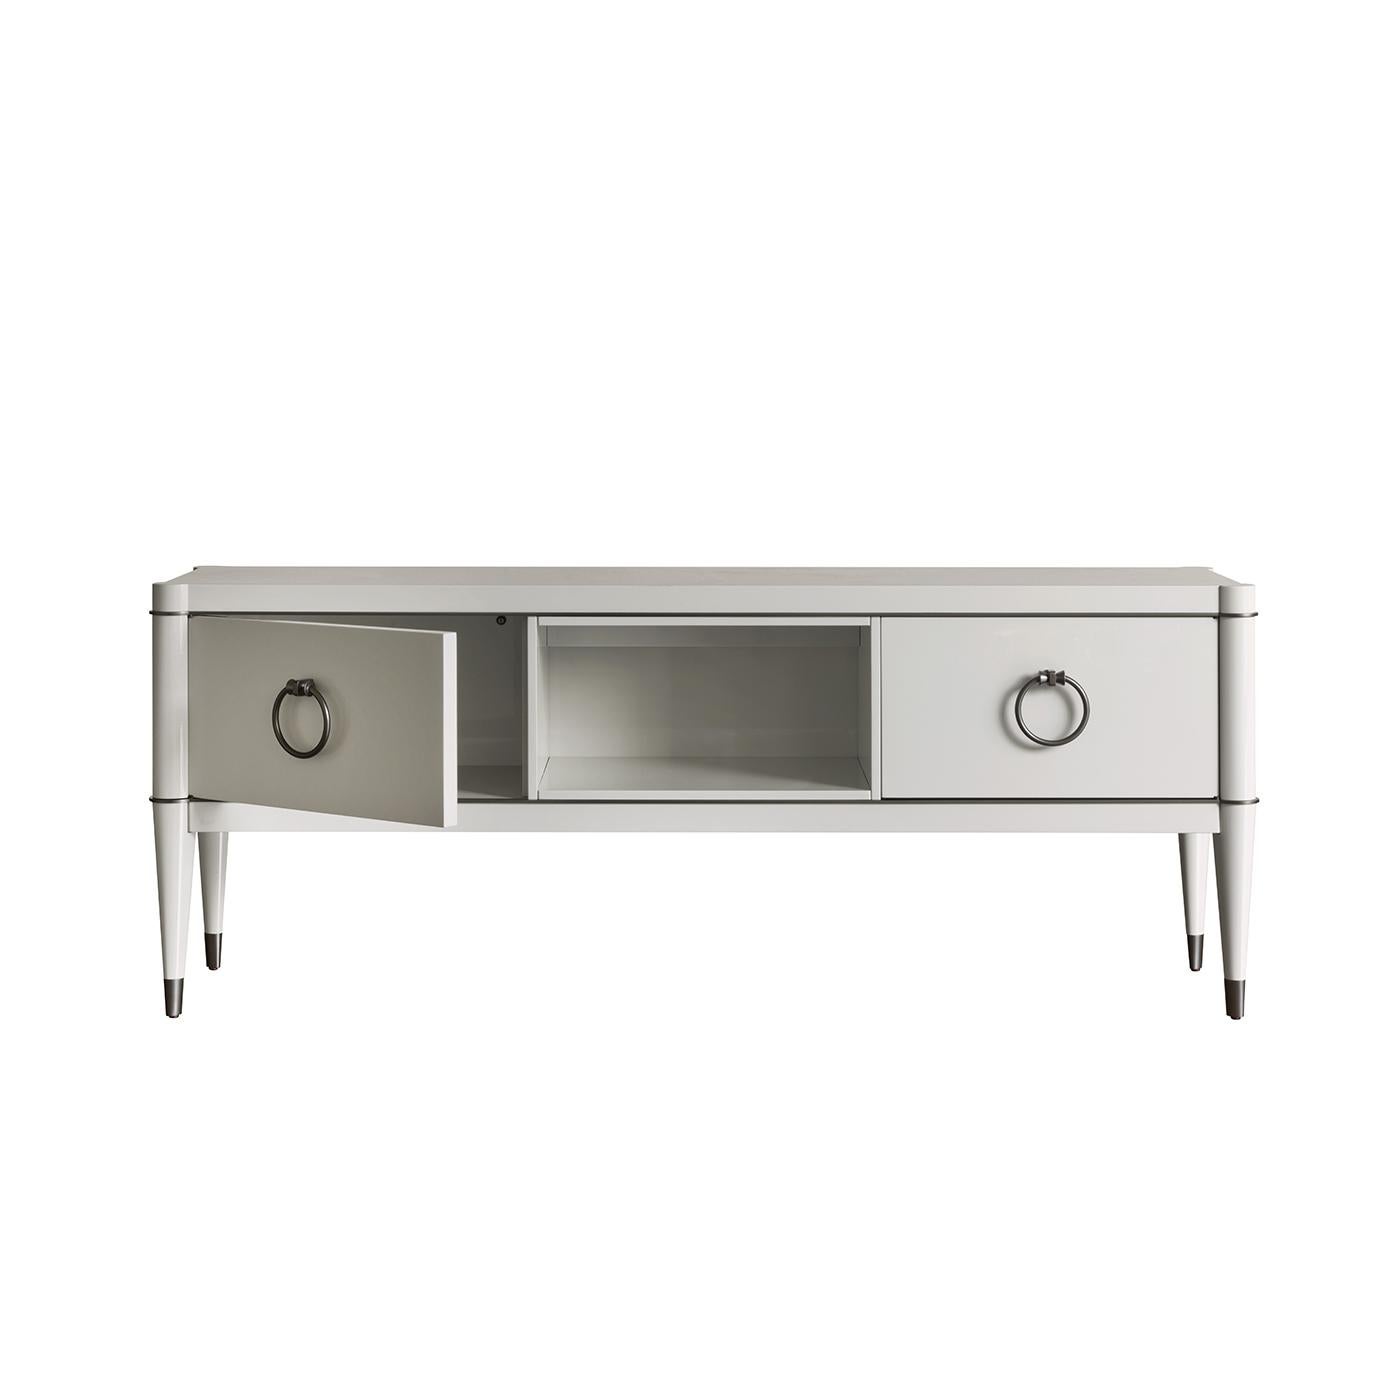 Part of the Ambra collection, this stunning console is a versatile display piece that features also a generous amount of storage space. Its solid wood structure is lacquered in white and features lateral feet accented with satin-finished brass feet